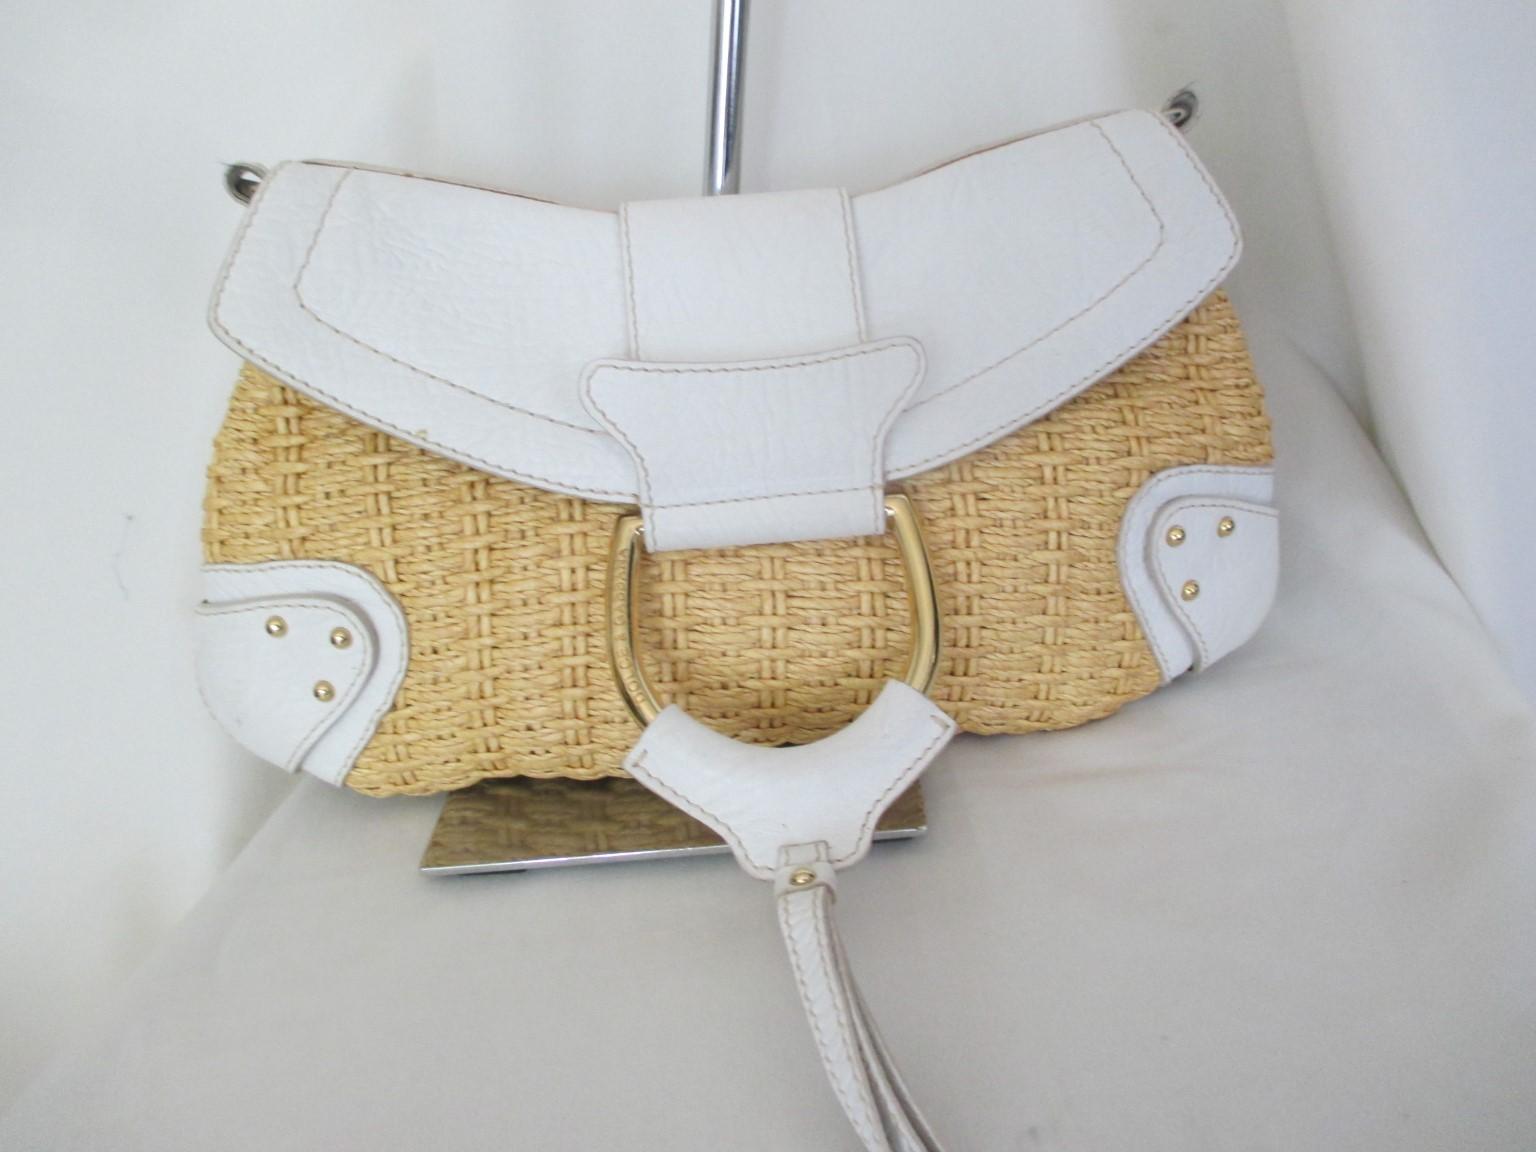 Dolce & Gabbana natural wicker white leather shoulder bag

We offer more exclusive vintage items, view our frontstore

Details:
The inside is the signature animal print fabric.  
There is one inside zipper pocket.
When opened you have the tan suede